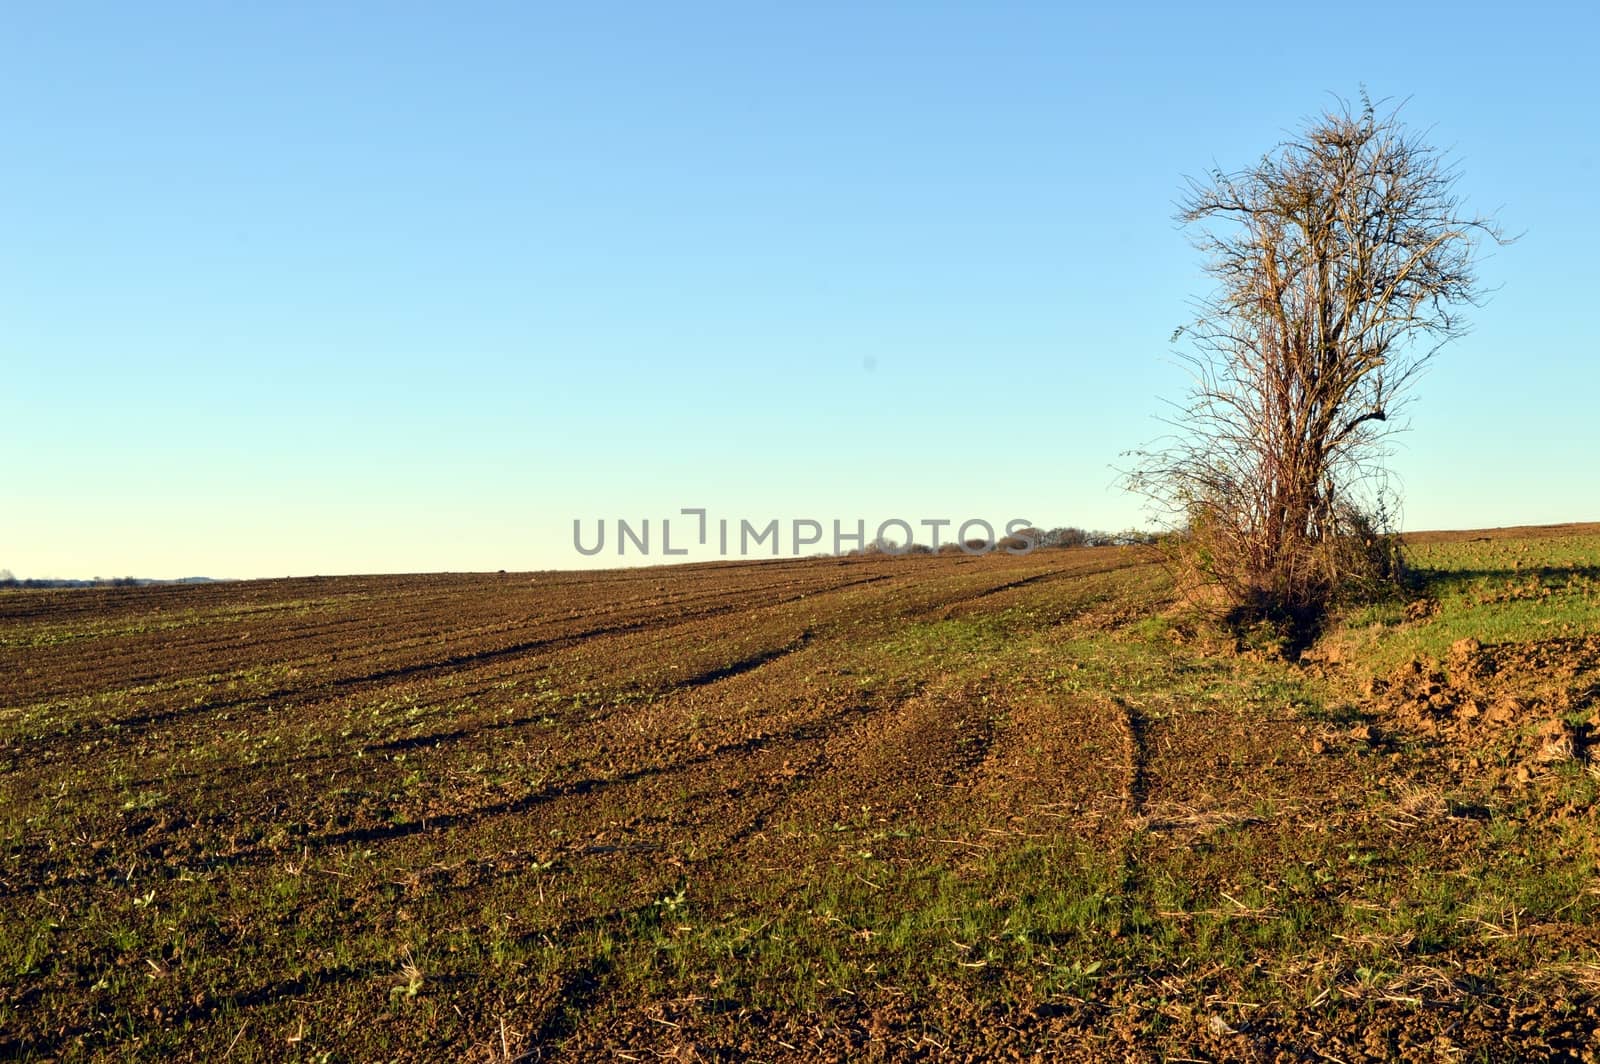 Plowing field with a tree isolated  by Philou1000